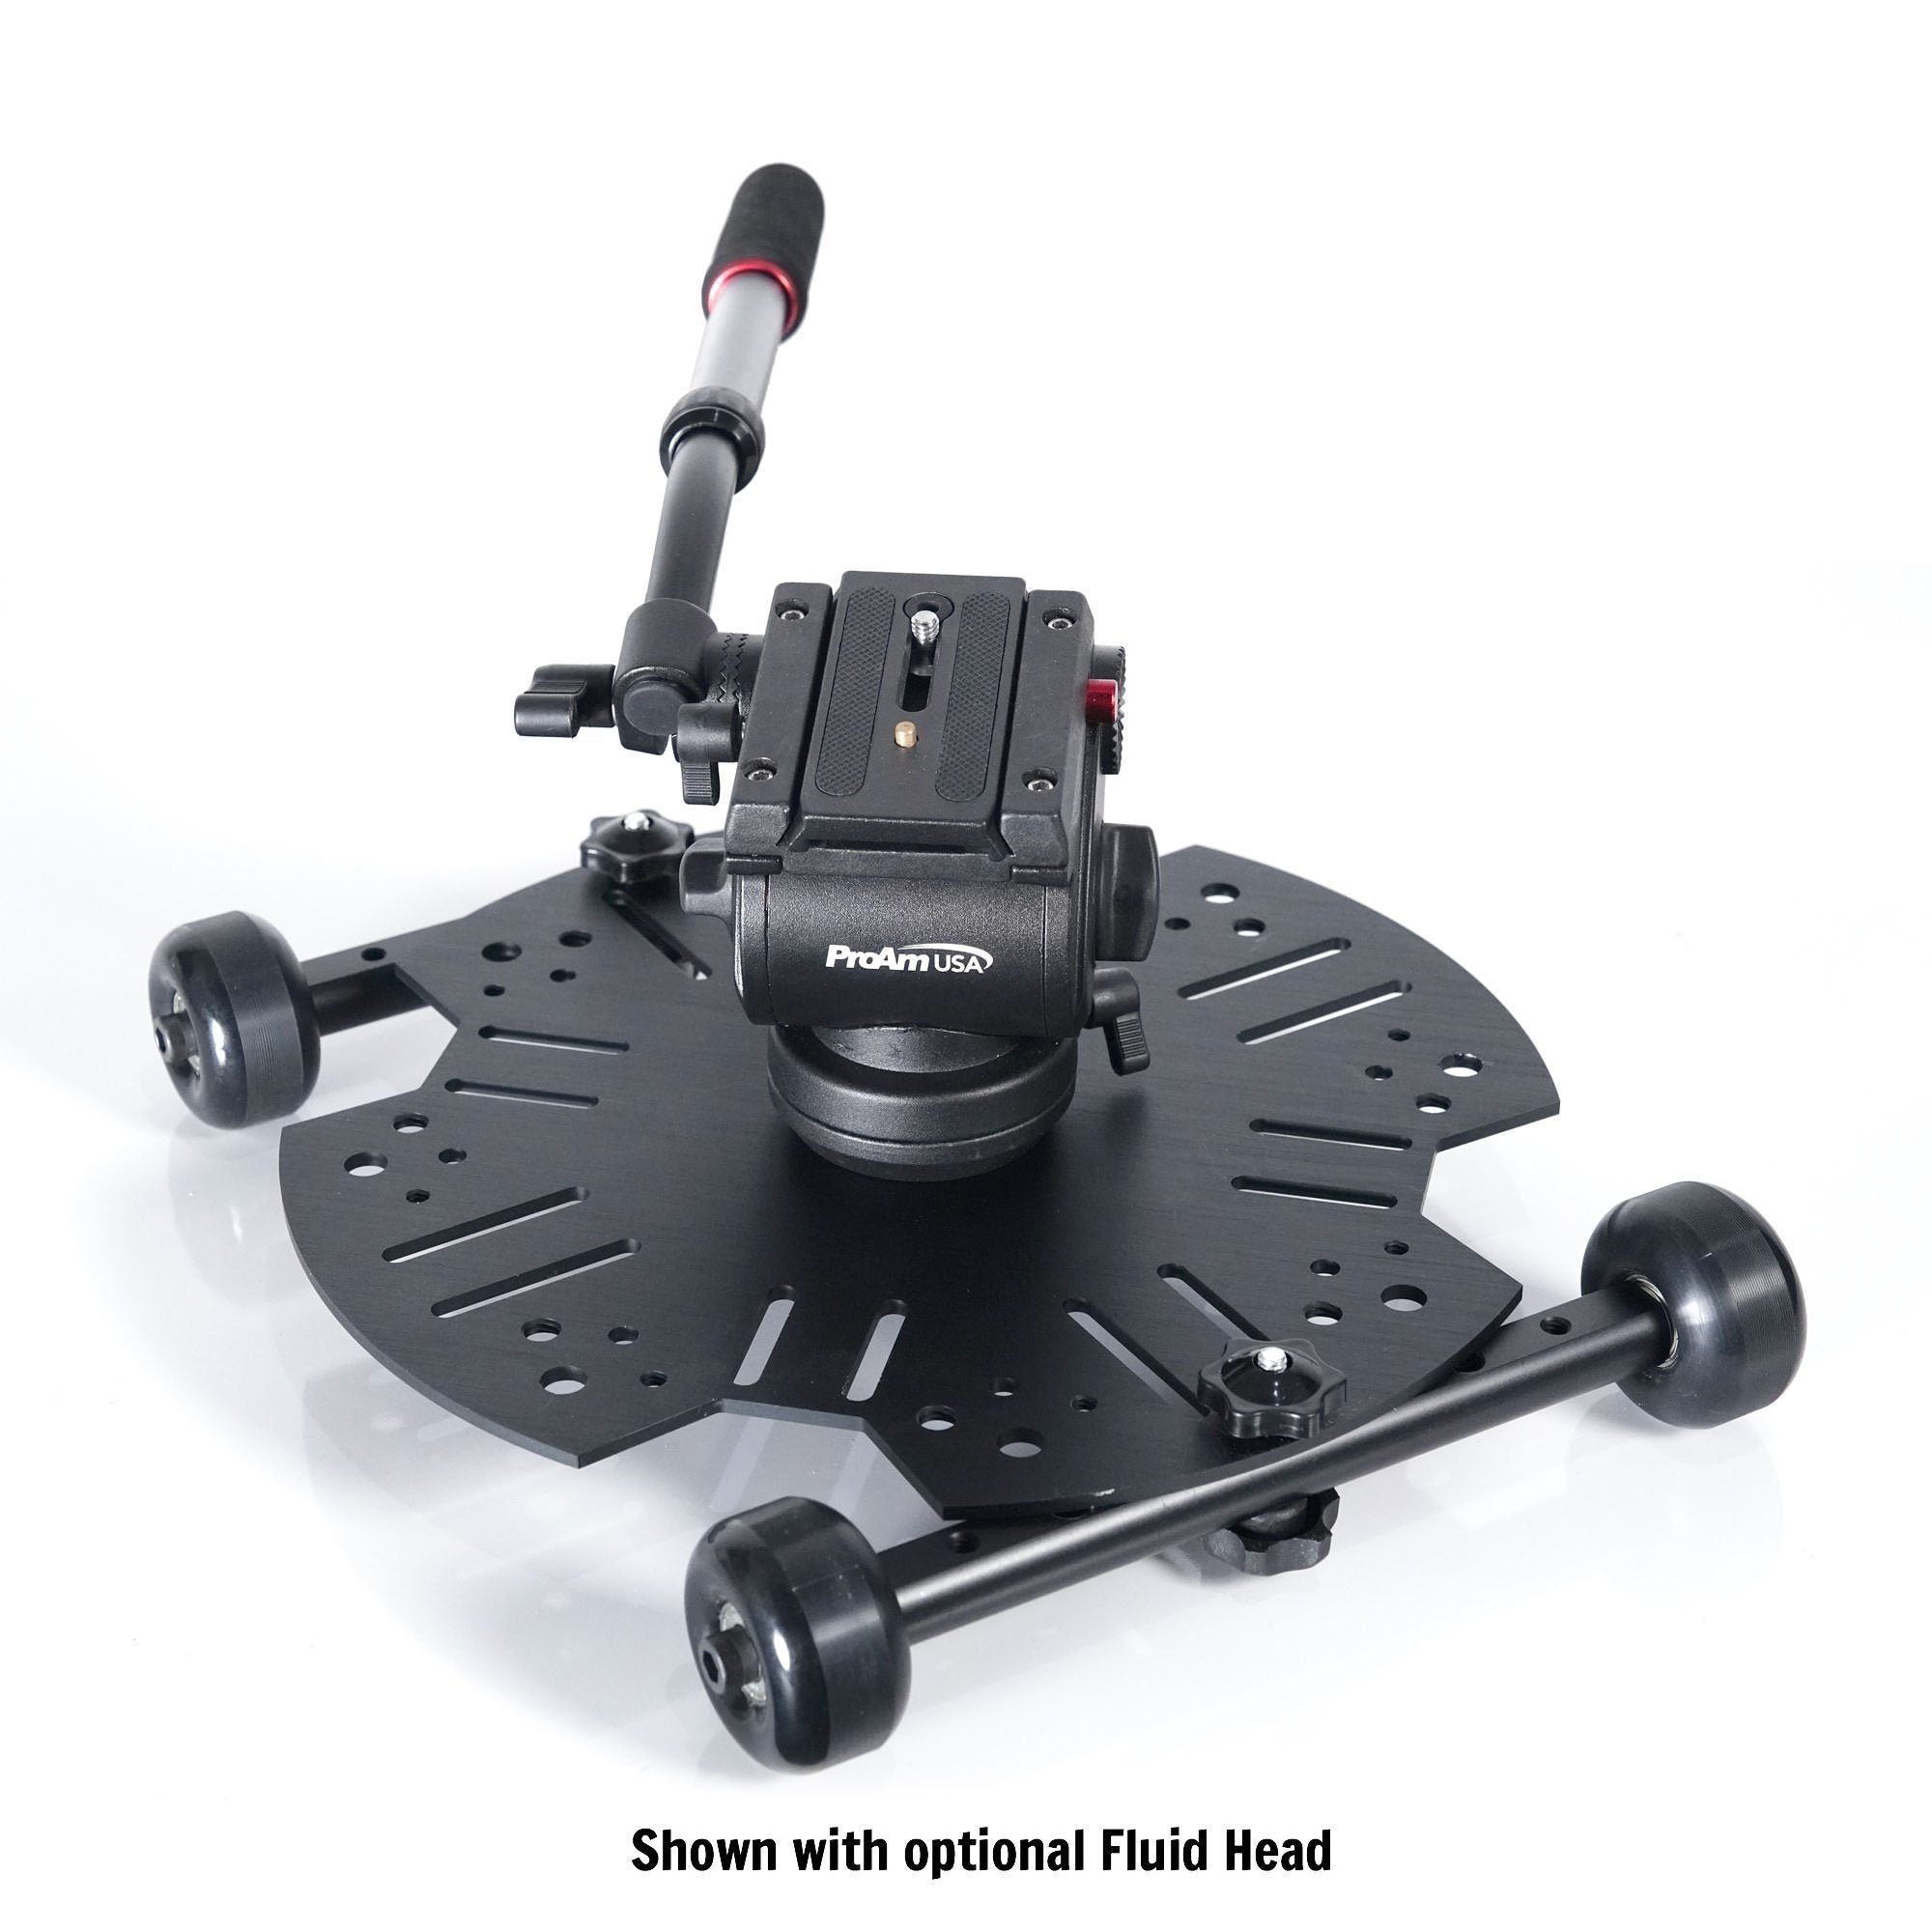 Universal Table Top Dolly DIY Wheels - Set of 2 - Works with Modus System - PRODUCTS